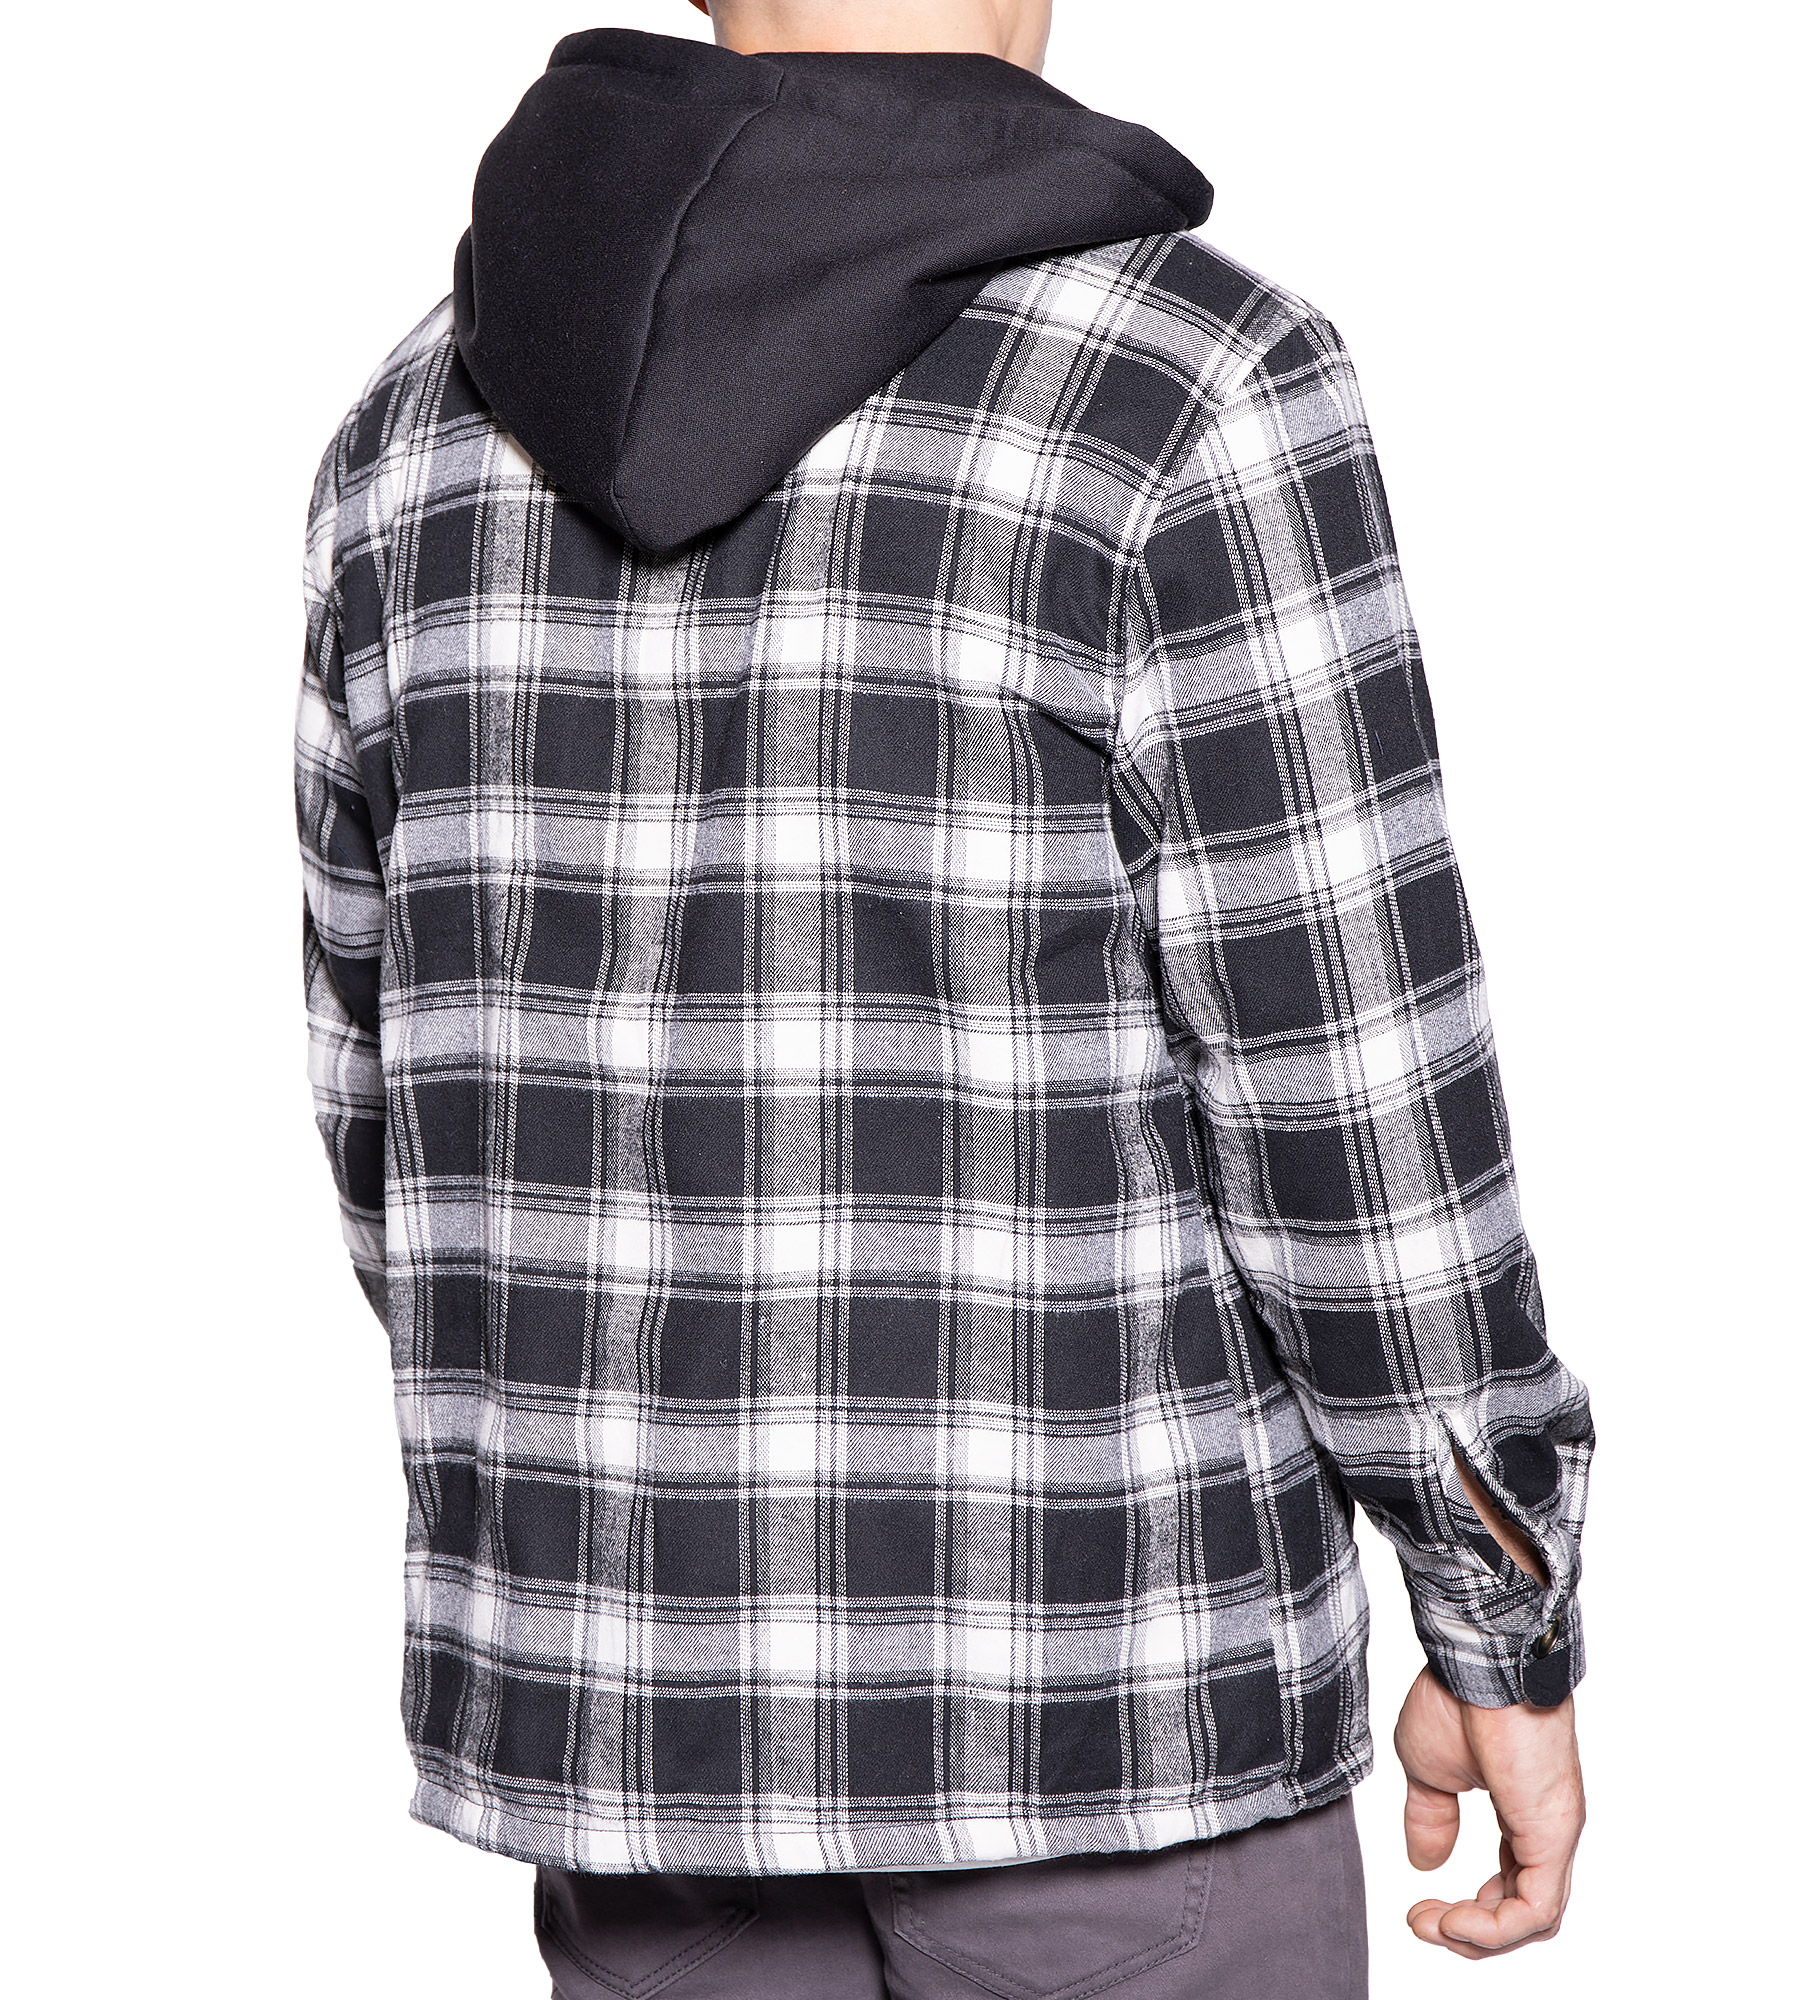 Visive Mens Heavy Sherpa Fleece-Lined Flannel Hooded Jacket - Big & Tall Sizes - Warm Zip Up Hoodie Jacket for Cold Weather - Perfect for Outdoor Activities - Durable & Fashion-Forward - image 3 of 6